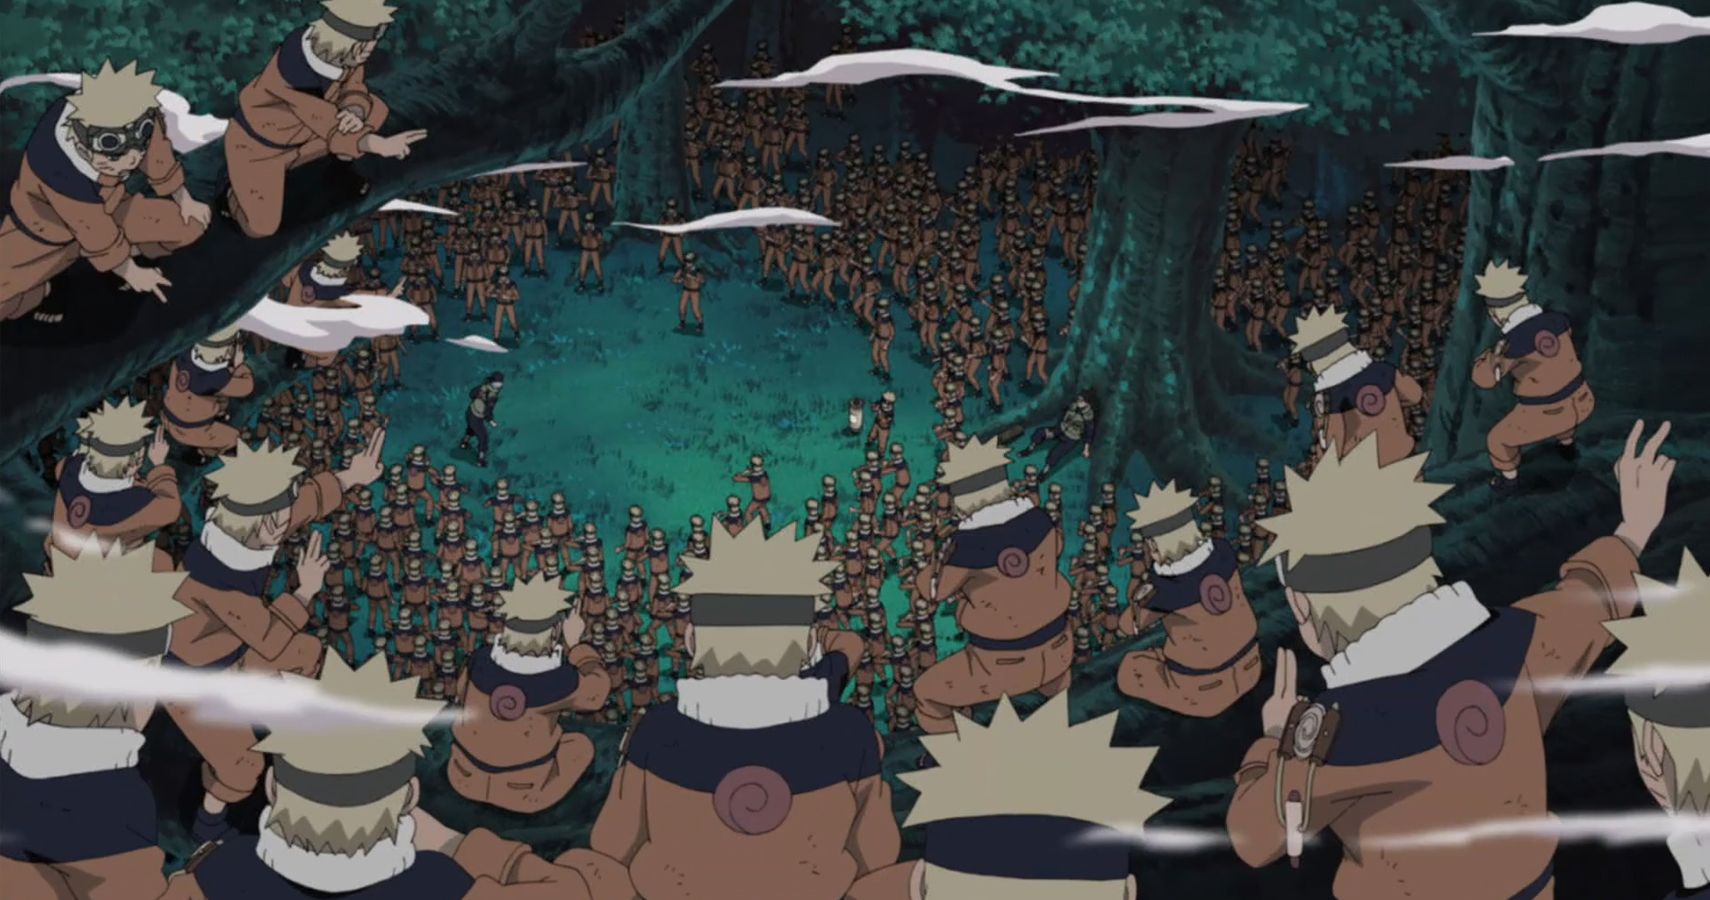 Is there anything you wish Naruto did that he didn't? - Quora